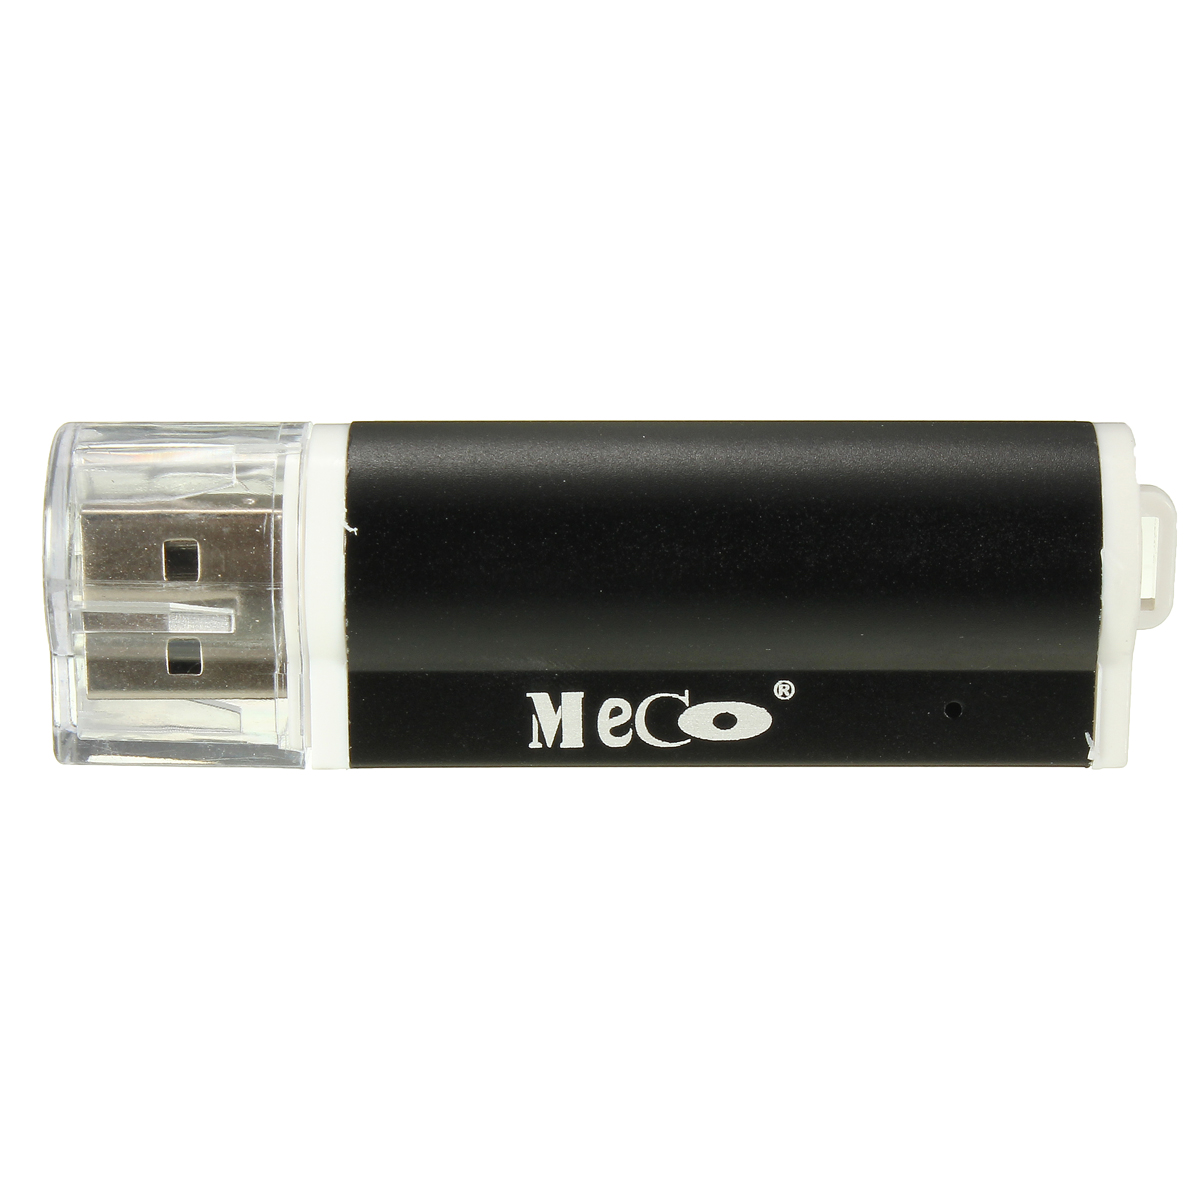 Meco-SY-662-USB20-Multifunctional-Card-Reader-TF--SD--SDHC--MMC-Memory-Card-Adapter-With-Sling-1884377-6